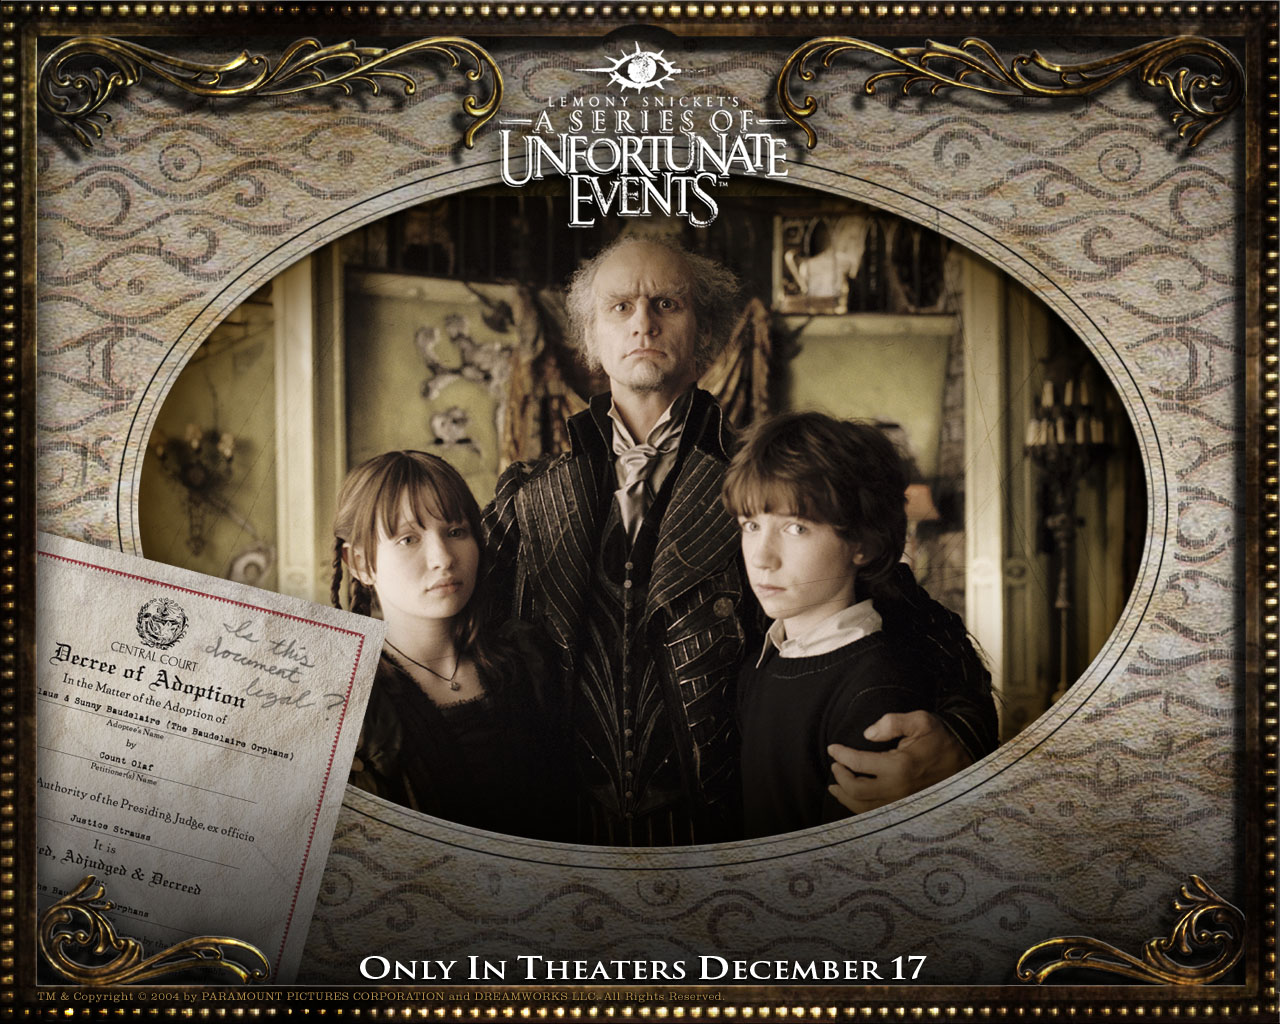 Lemony Snicket's A Series Of Unfortunate Events #2